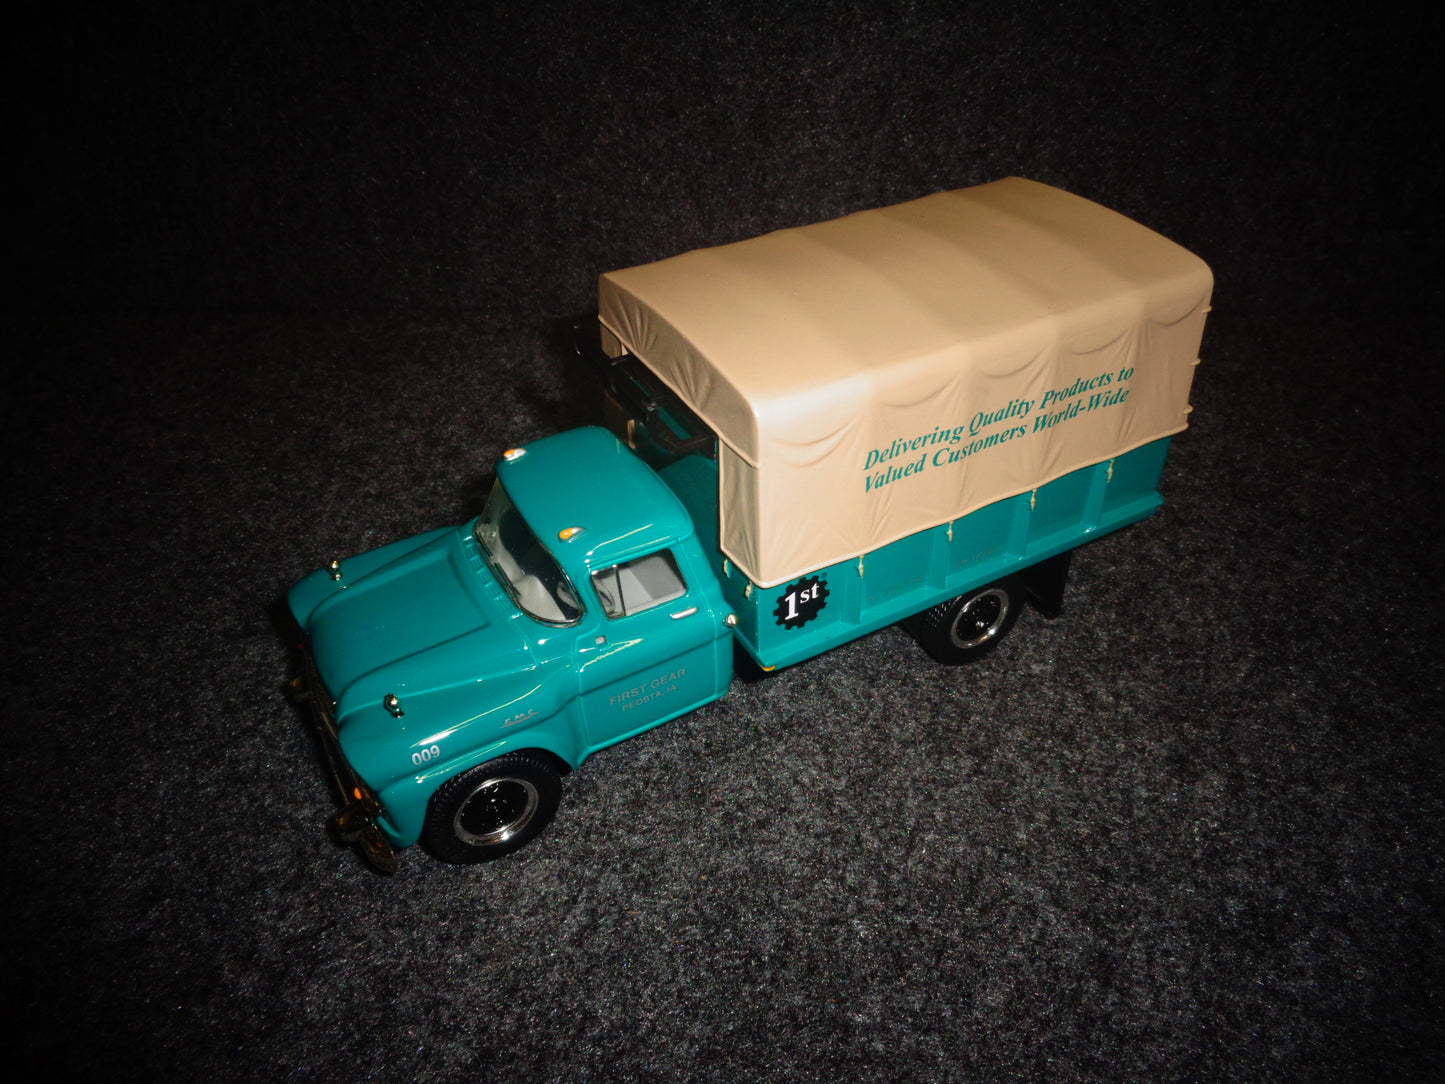 First Gear 1958 GMC Cargo Delivery Truck